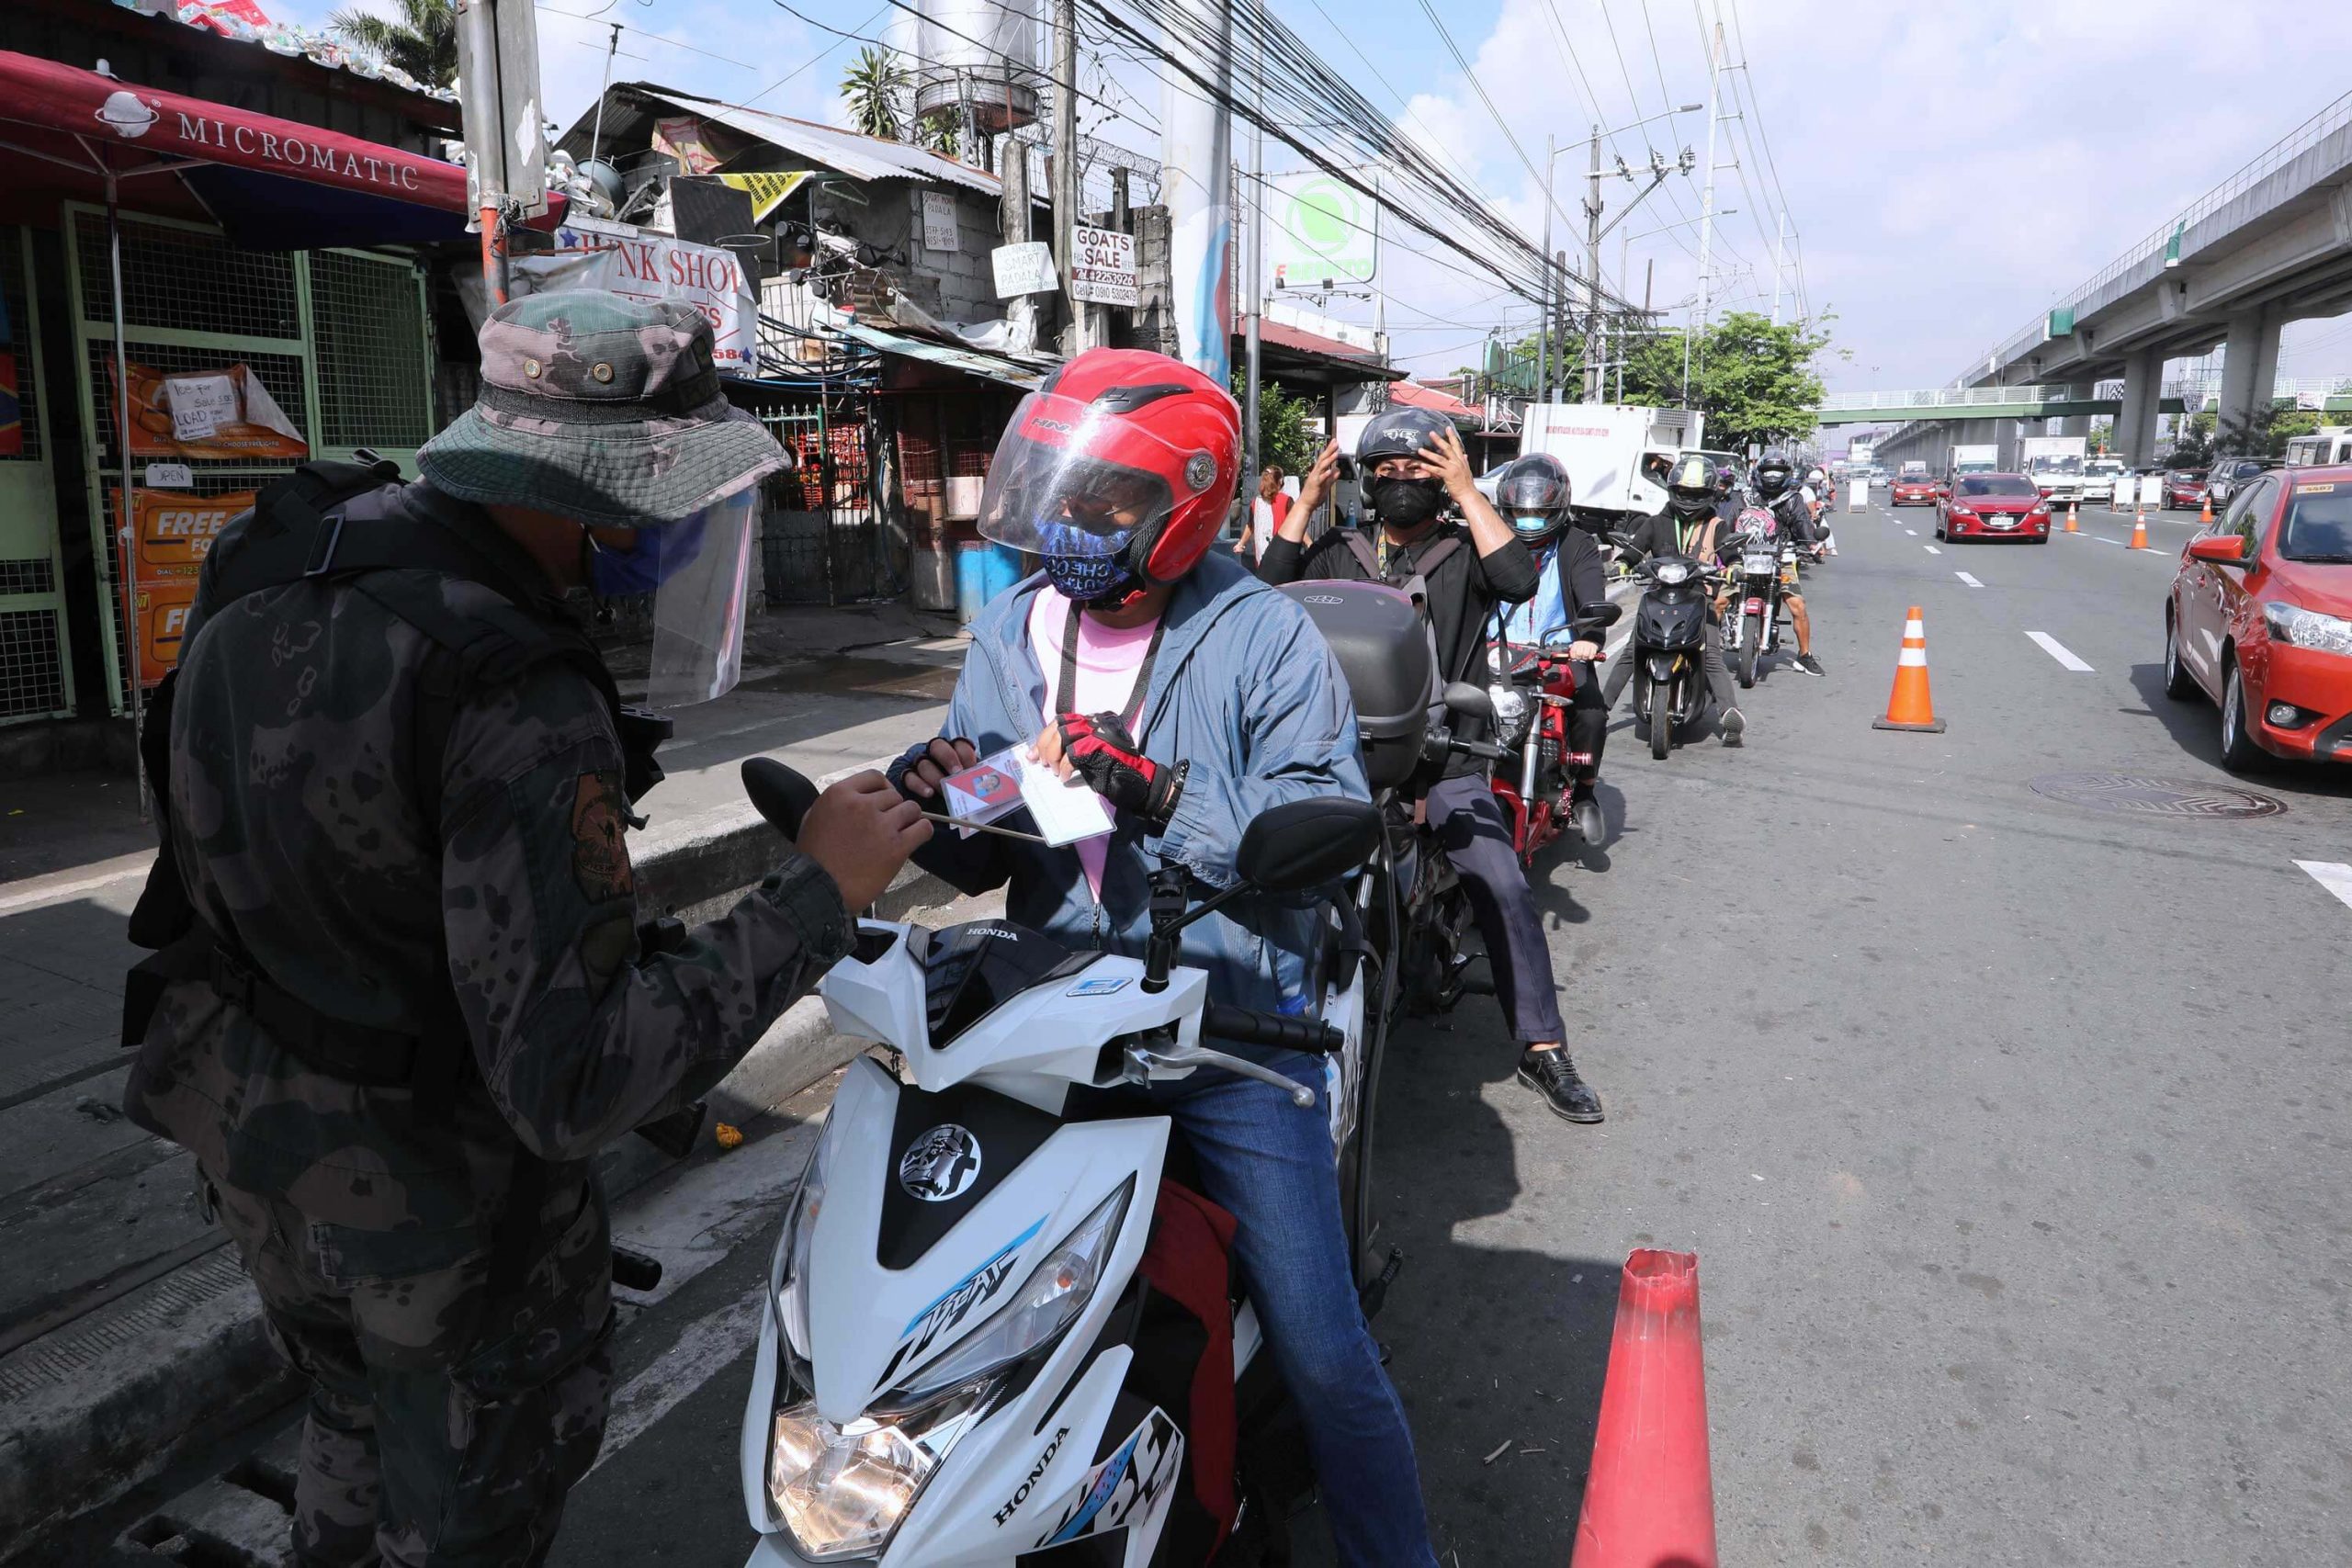 INSPECTION. A police officer inspects IDs and other documents presented by motorcycle riders entering Antipolo City, Rizal. Checkpoints remain despite easing of some restrictions under the general community quarantine which took effect in the province on May 16. (PNA photo by Joey O. Razon)